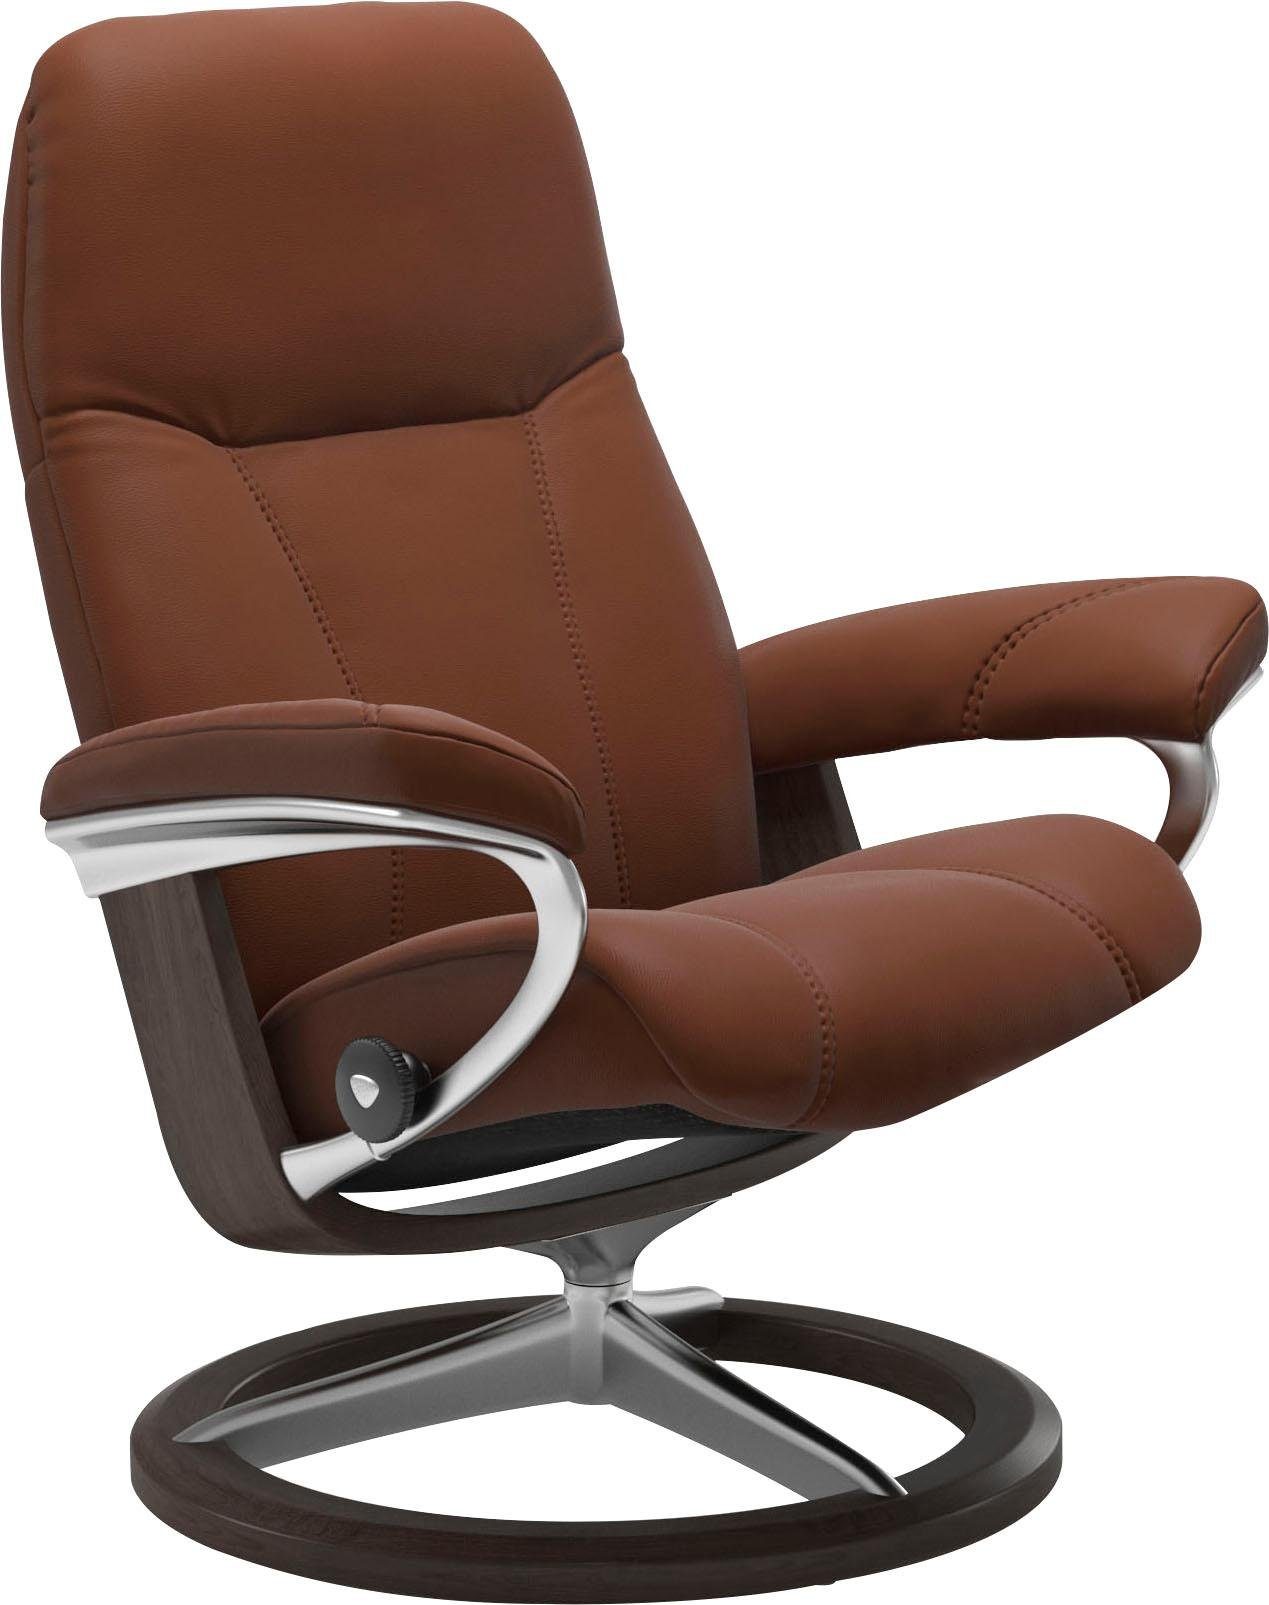 Stressless® Relaxsessel Consul, mit Signature Base, Größe L, Gestell Wenge | Funktionssessel